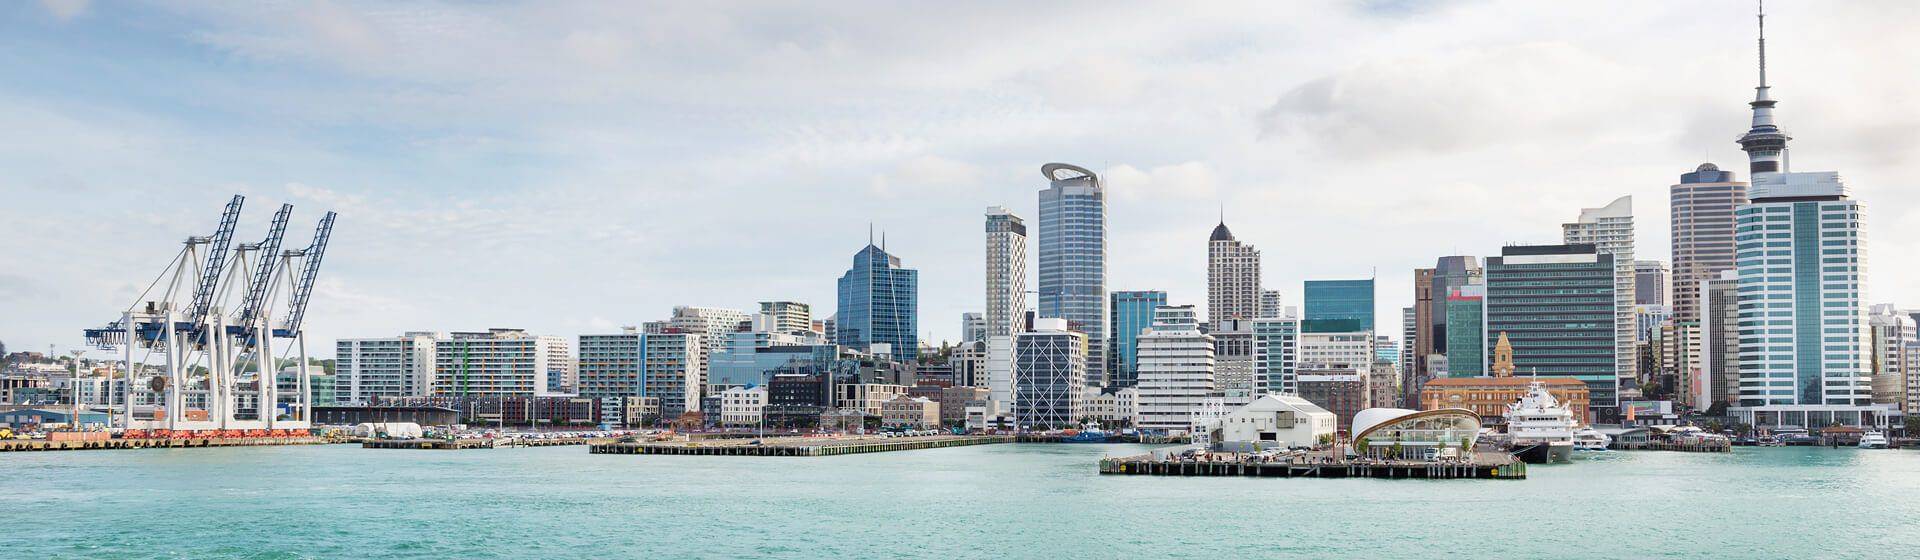 Holidays to Auckland Image